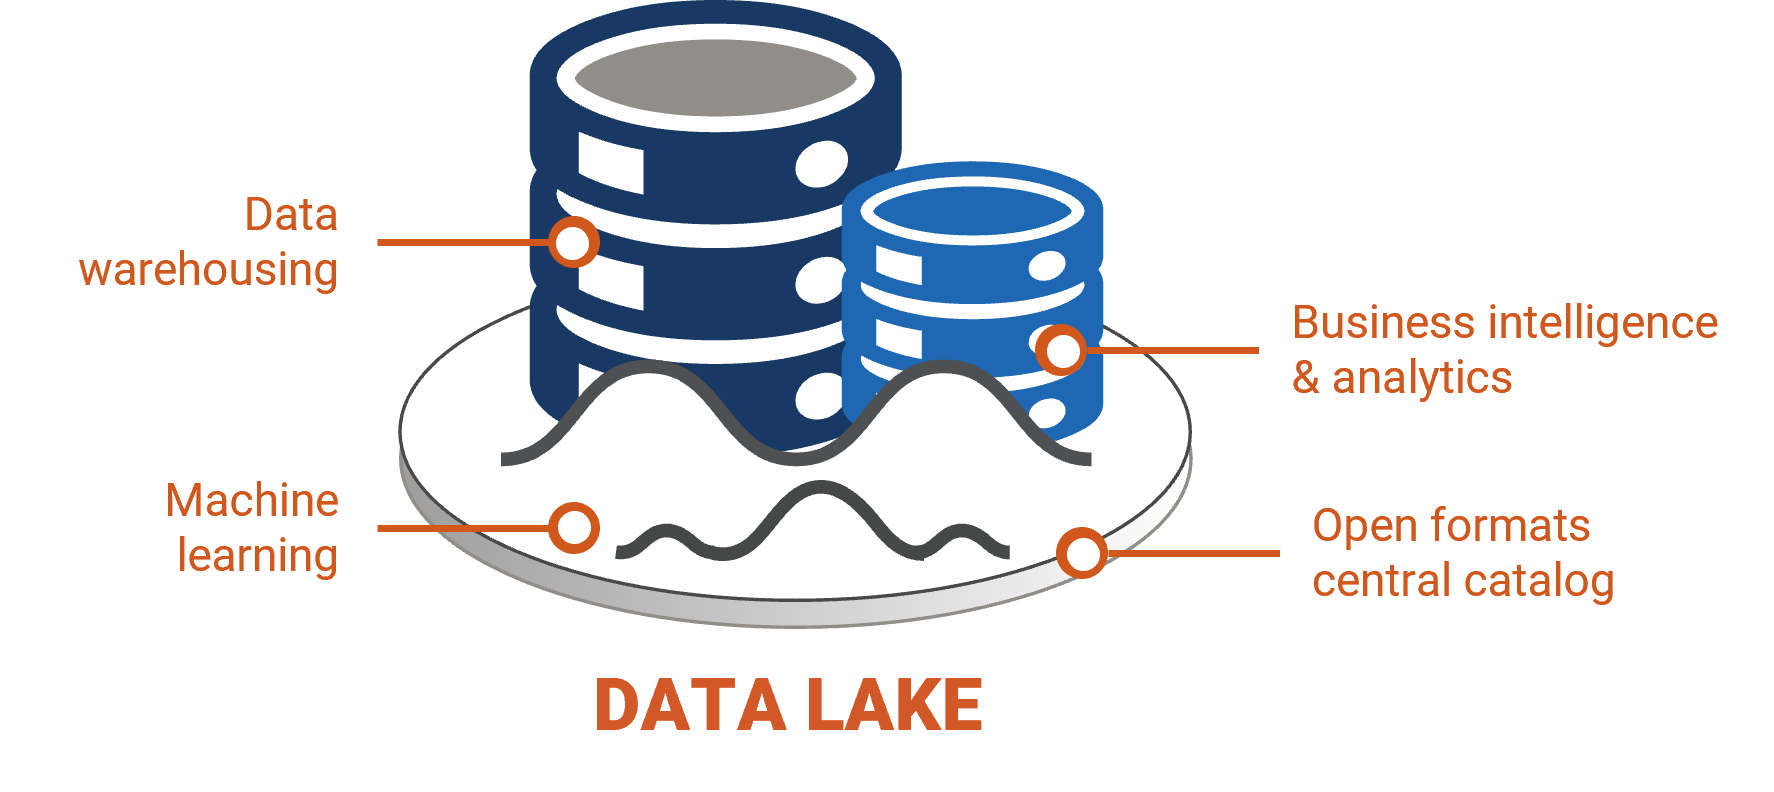 Data lakes allow you to  store your data as-is (without having to first structure the data) and run different types of analytics—from dashboards and visualizations to big data processing, real-time analytics, and machine learning to guide better decisions.